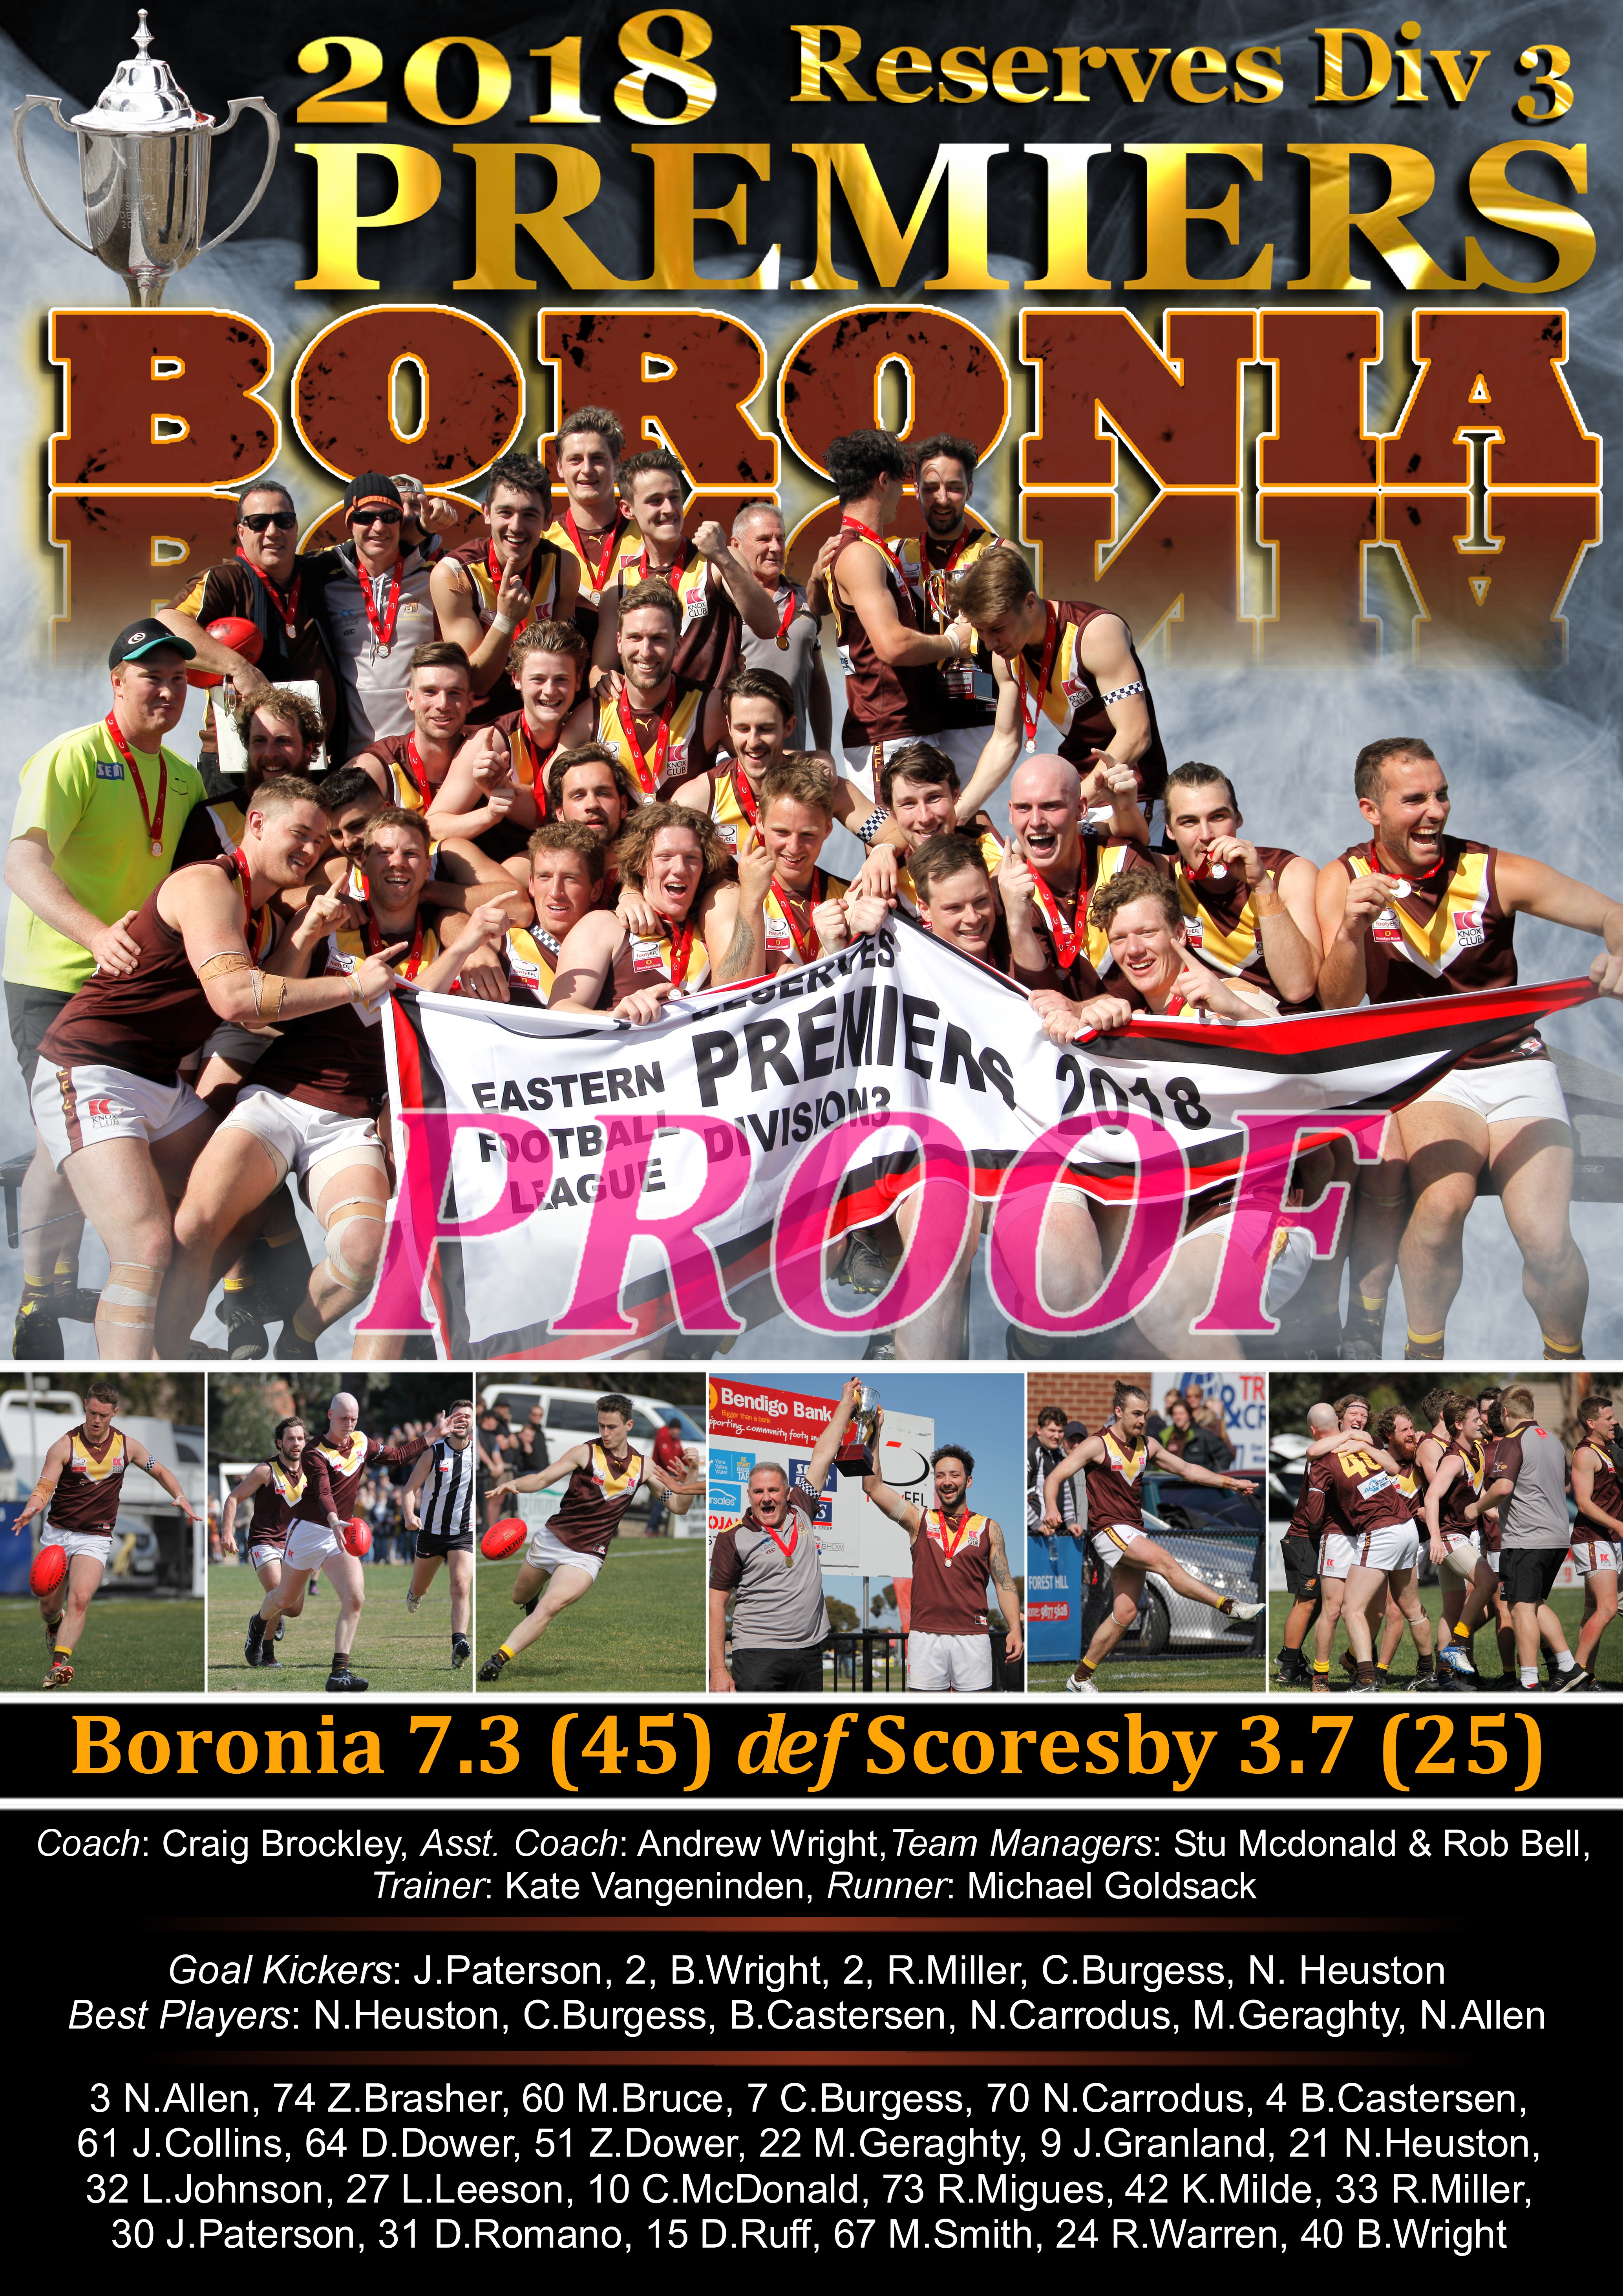 GF Poster Boronia Reserves Div 3 A2 PROOF